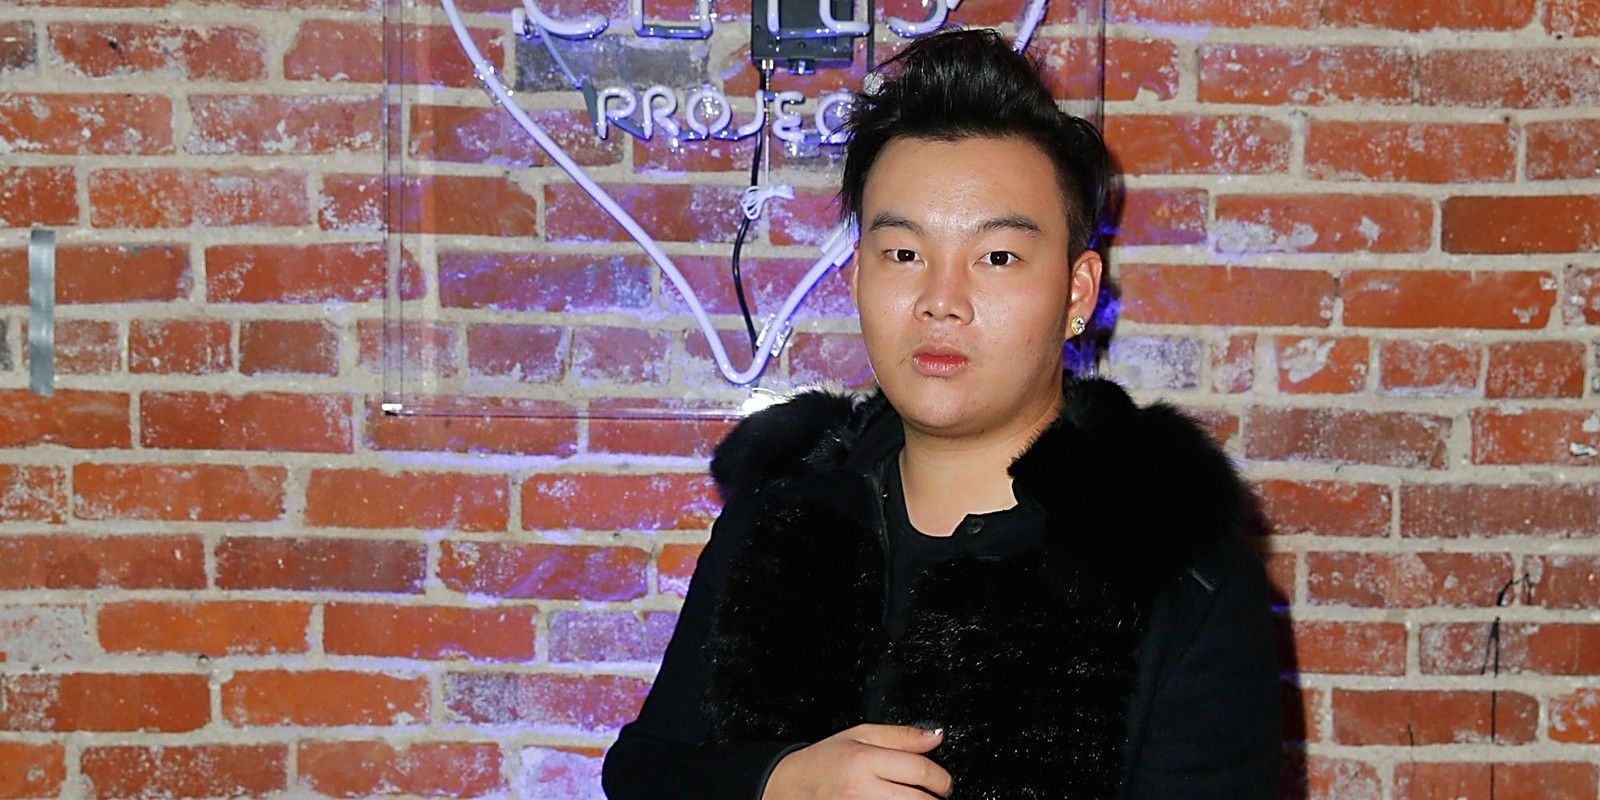 Heart joins Kane Lim of 'Bling Empire' in Netflix party